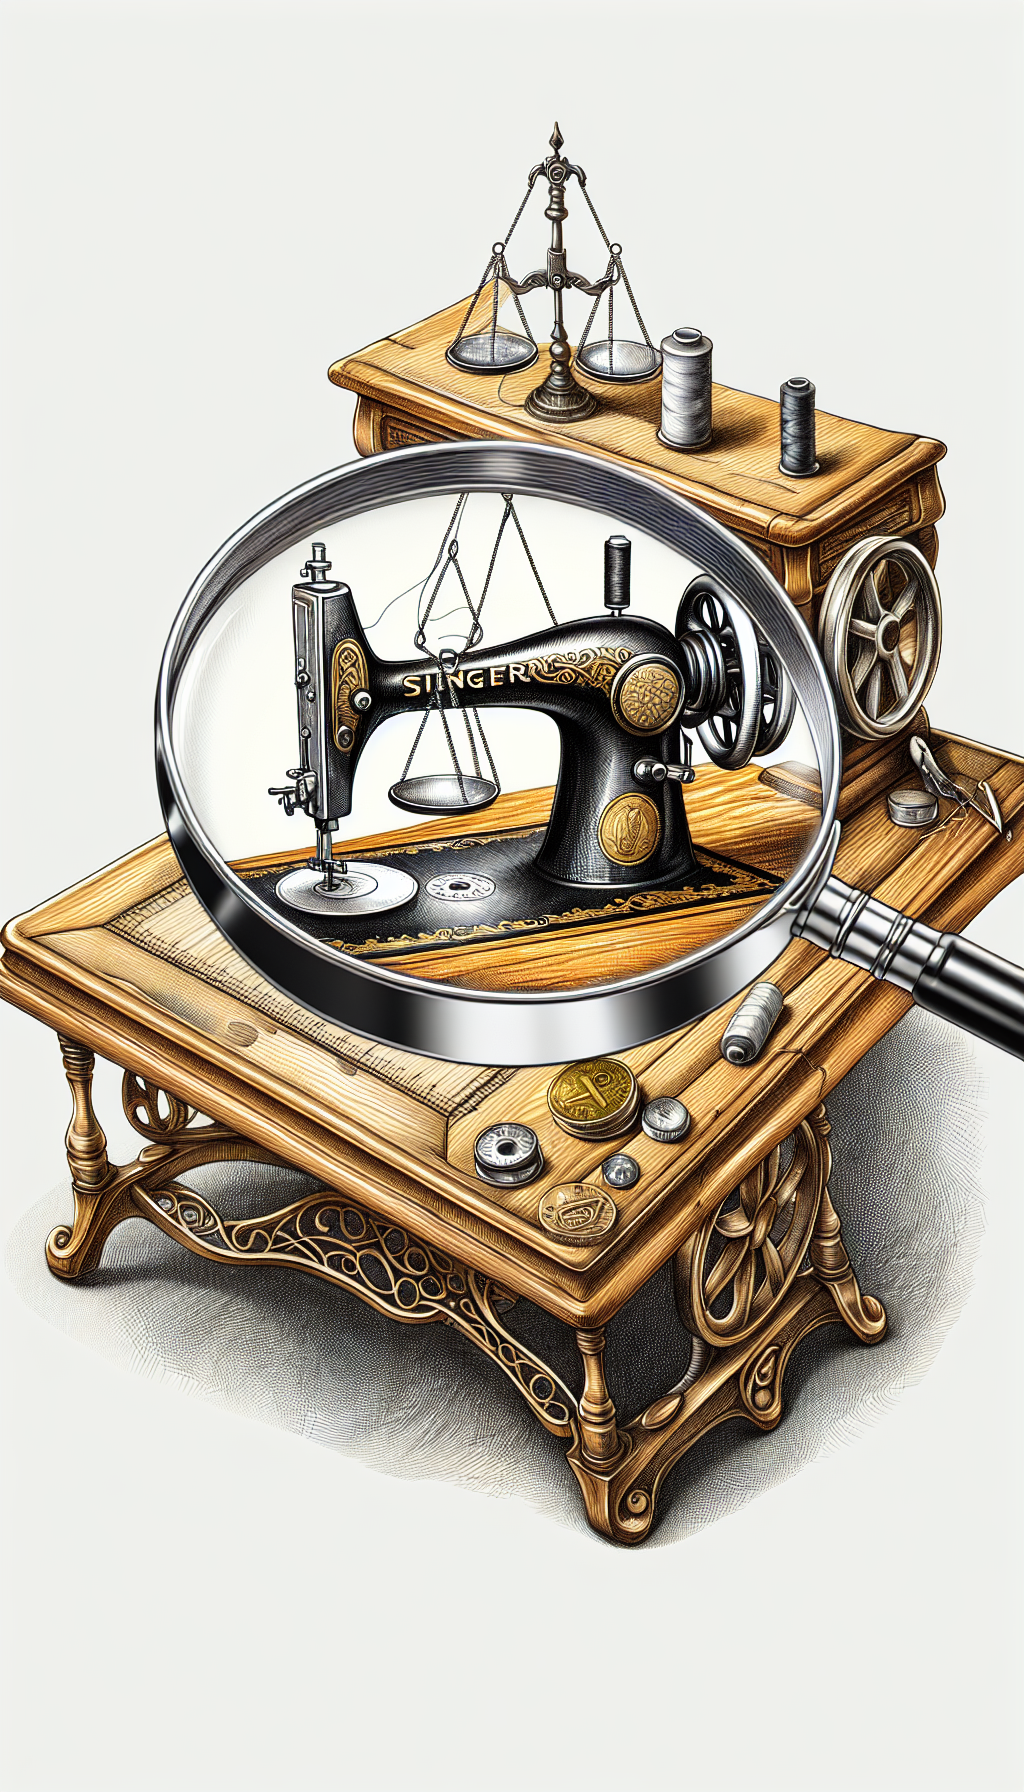 An illustration of a magnifying glass hovering over a meticulously detailed antique Singer sewing machine table, its wooden textures and metal components highlighted to signify scrutiny. A scale balances a thread spool and a golden coin on either side, symbolizing the assessment of craftsmanship and value. The image juxtaposes sketch-like outlines with photorealistic shading to convey the blend of evaluation and historical worth.